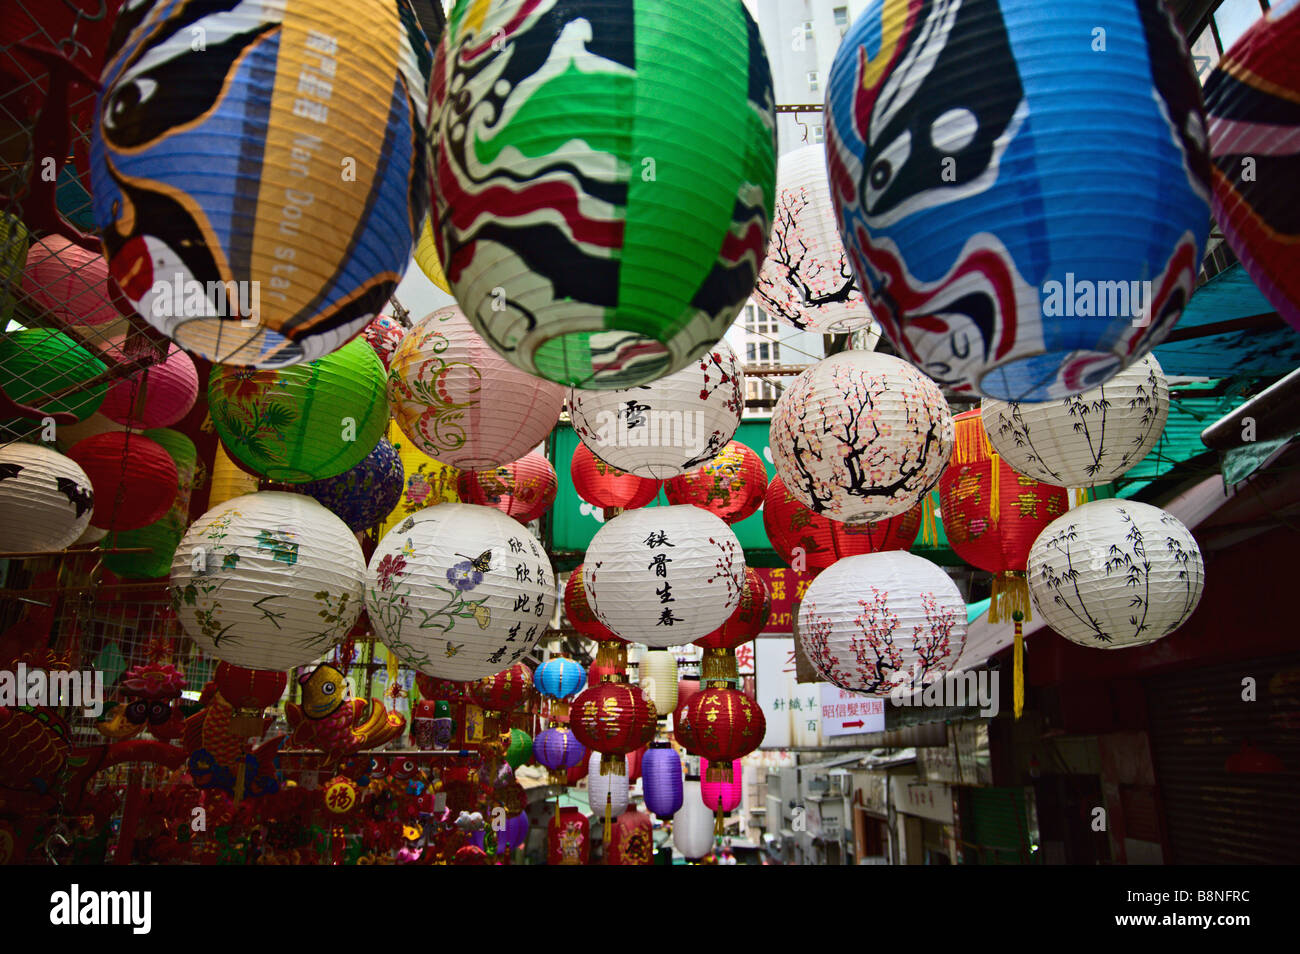 Colorful Chinese lanterns on sale at market stall Central Hong Kong Stock Photo